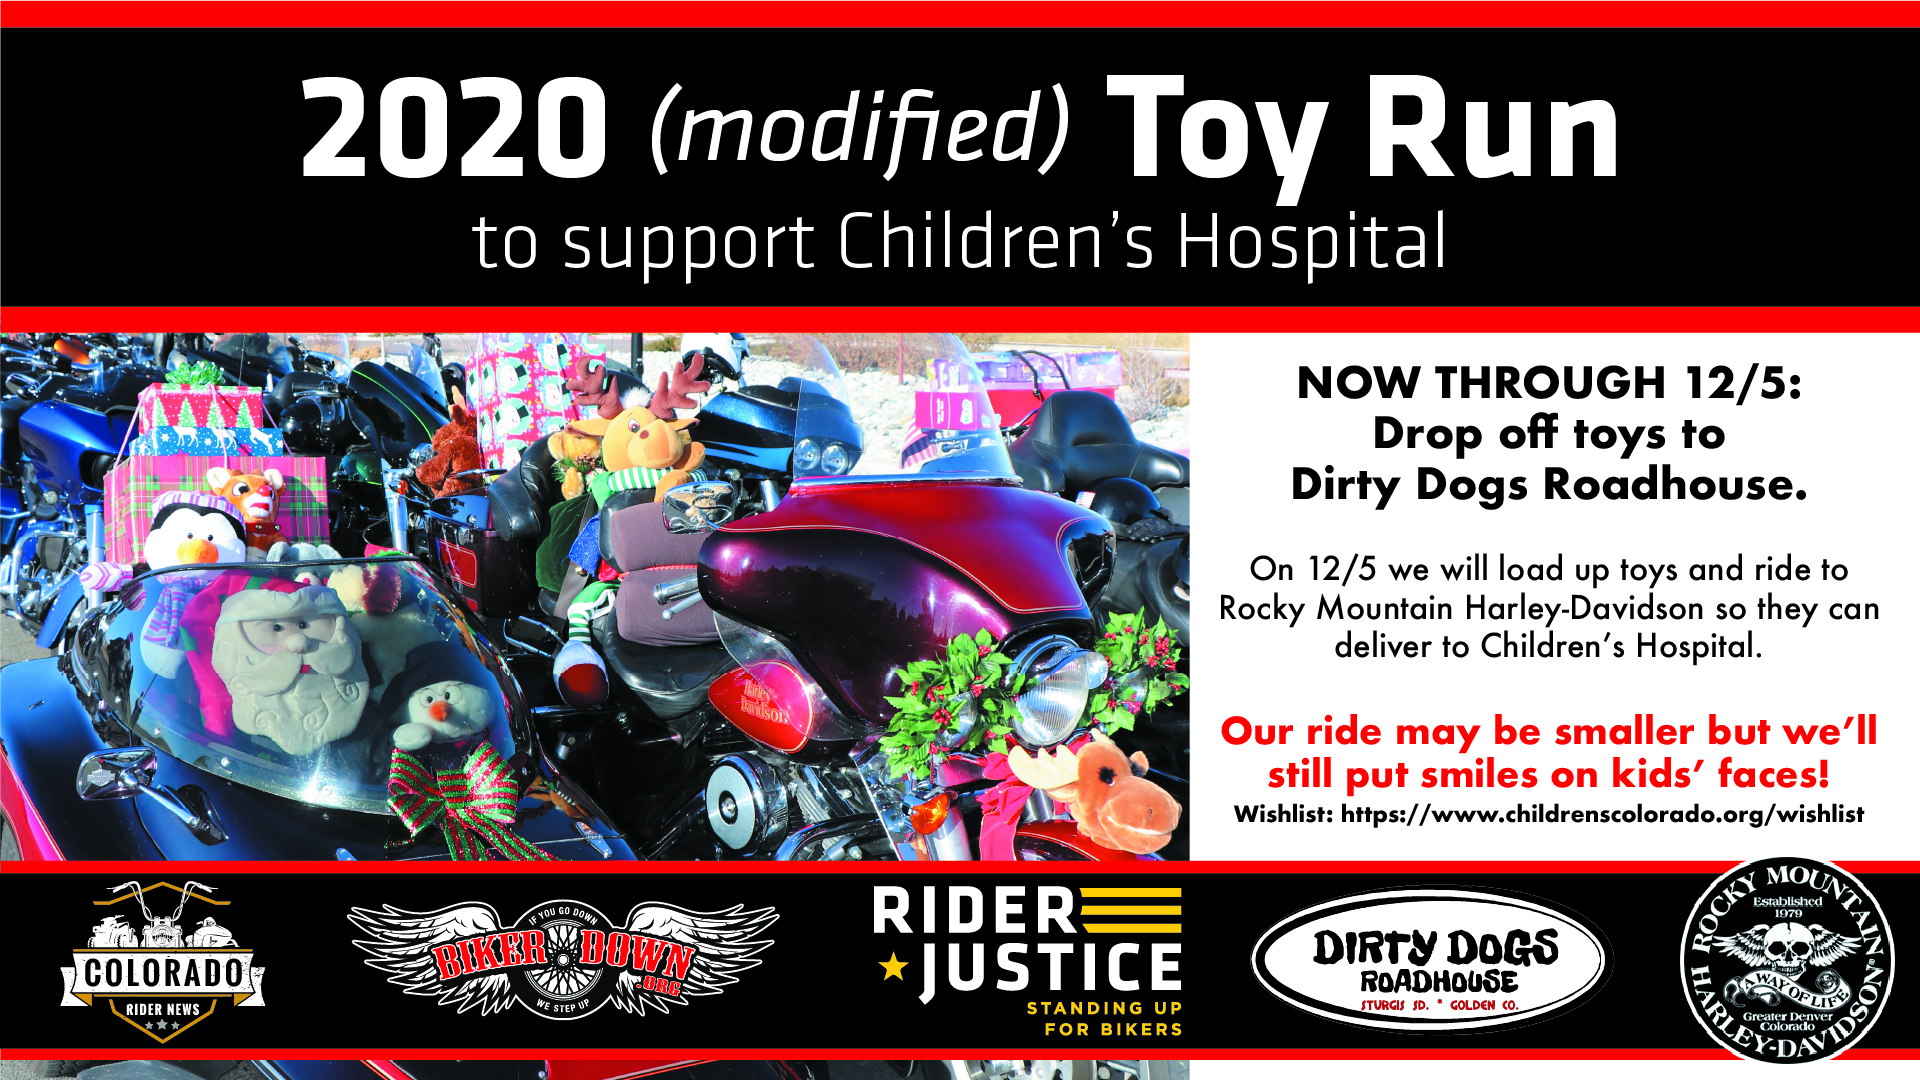 “Modified” Toy Run Scheduled for Saturday, December 5th